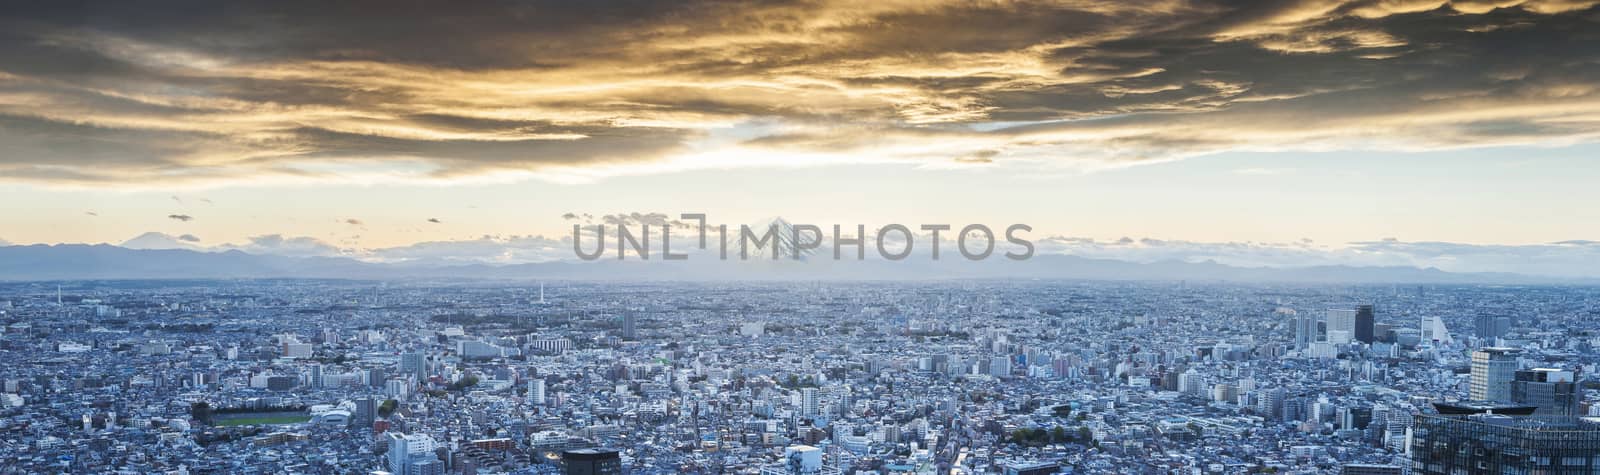 Mt.Fuji covered with snow and Japan cityscape on the sky in twilight